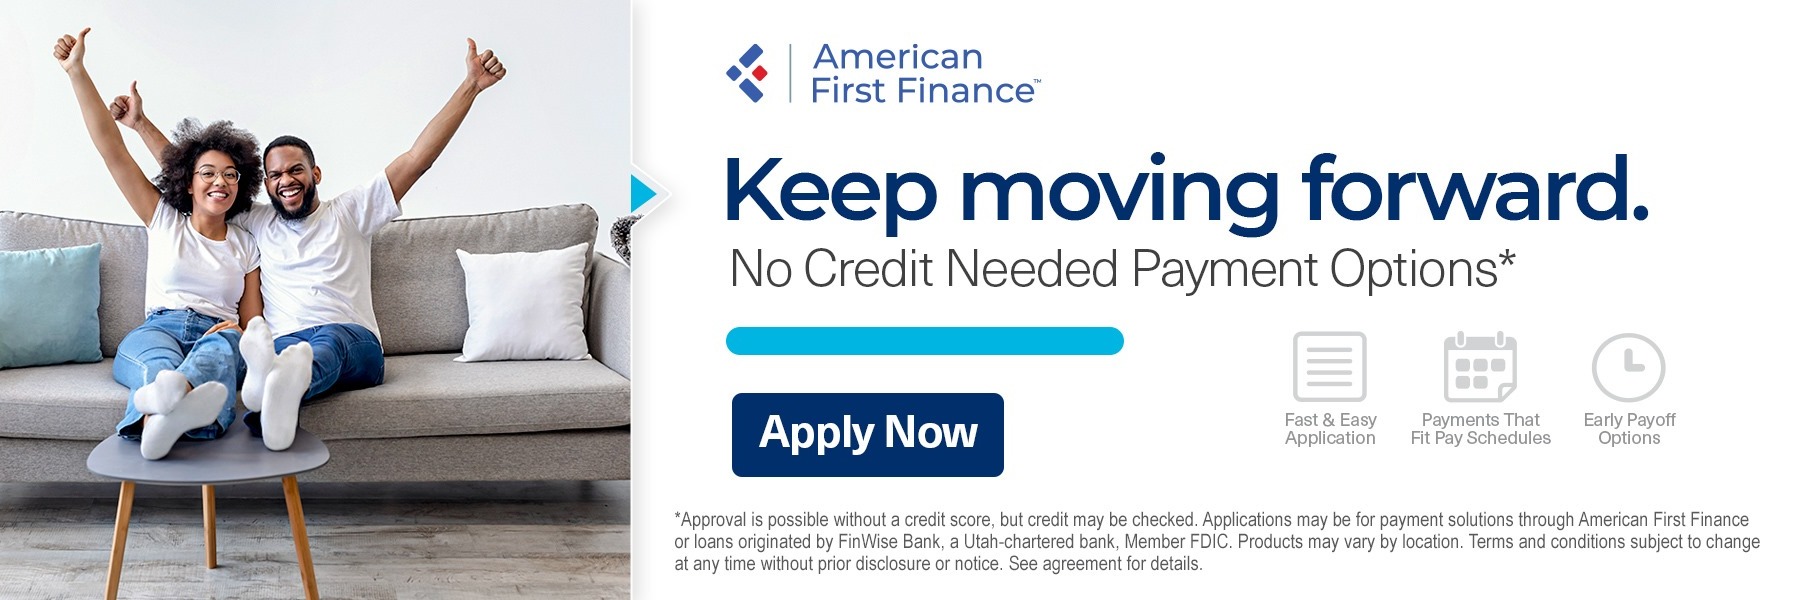 American First Finance | No Credit Needed Payment Options* | Apply Now